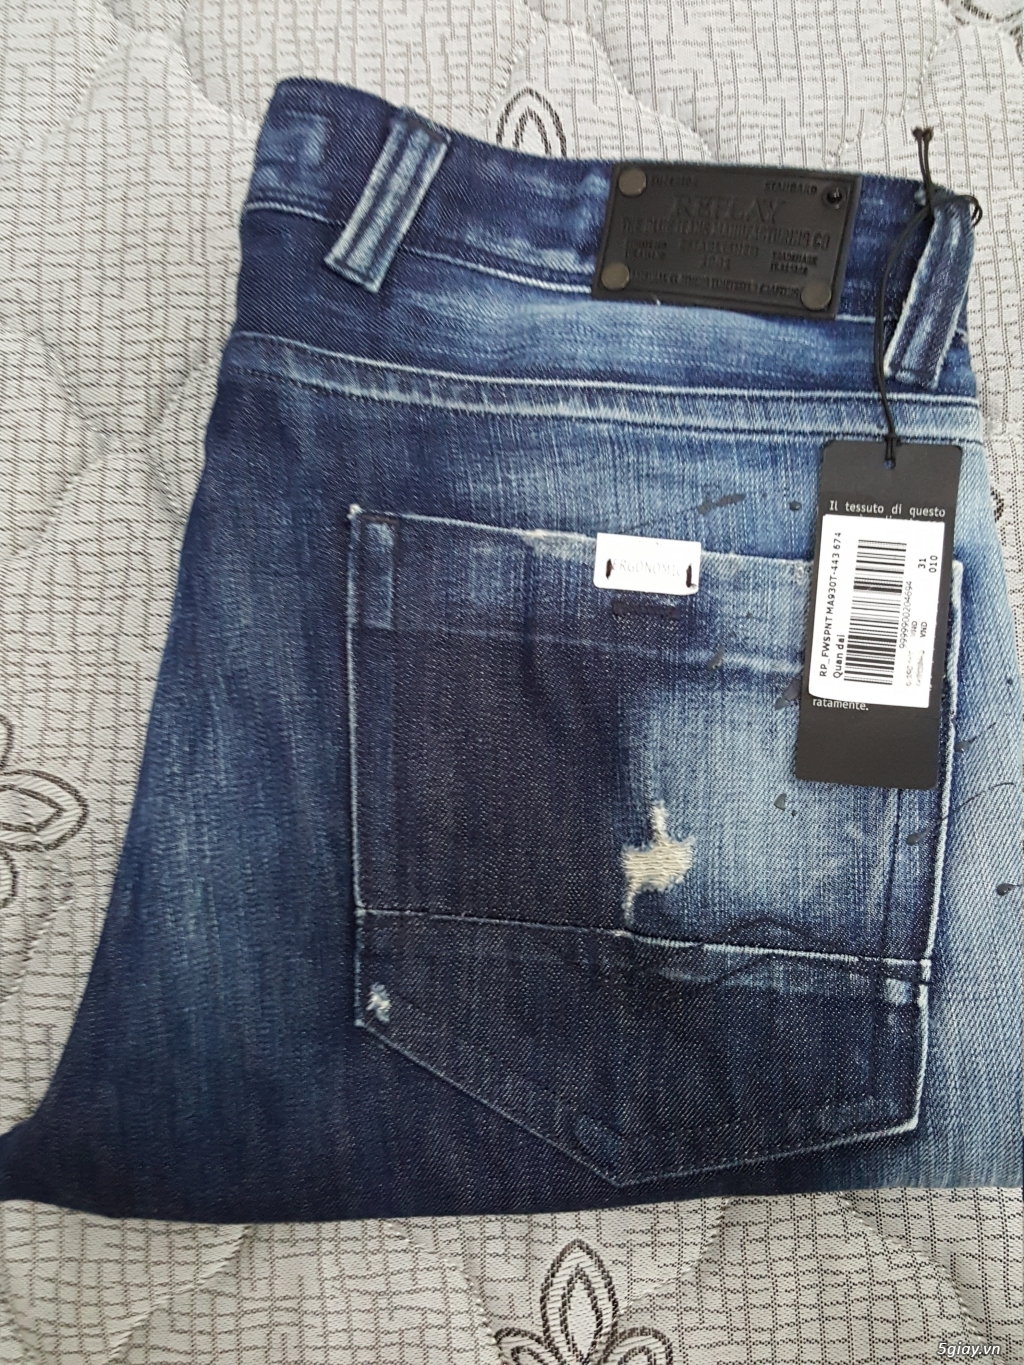 Jeans REPLAY Lonham size 31 - New full tags ! - 3